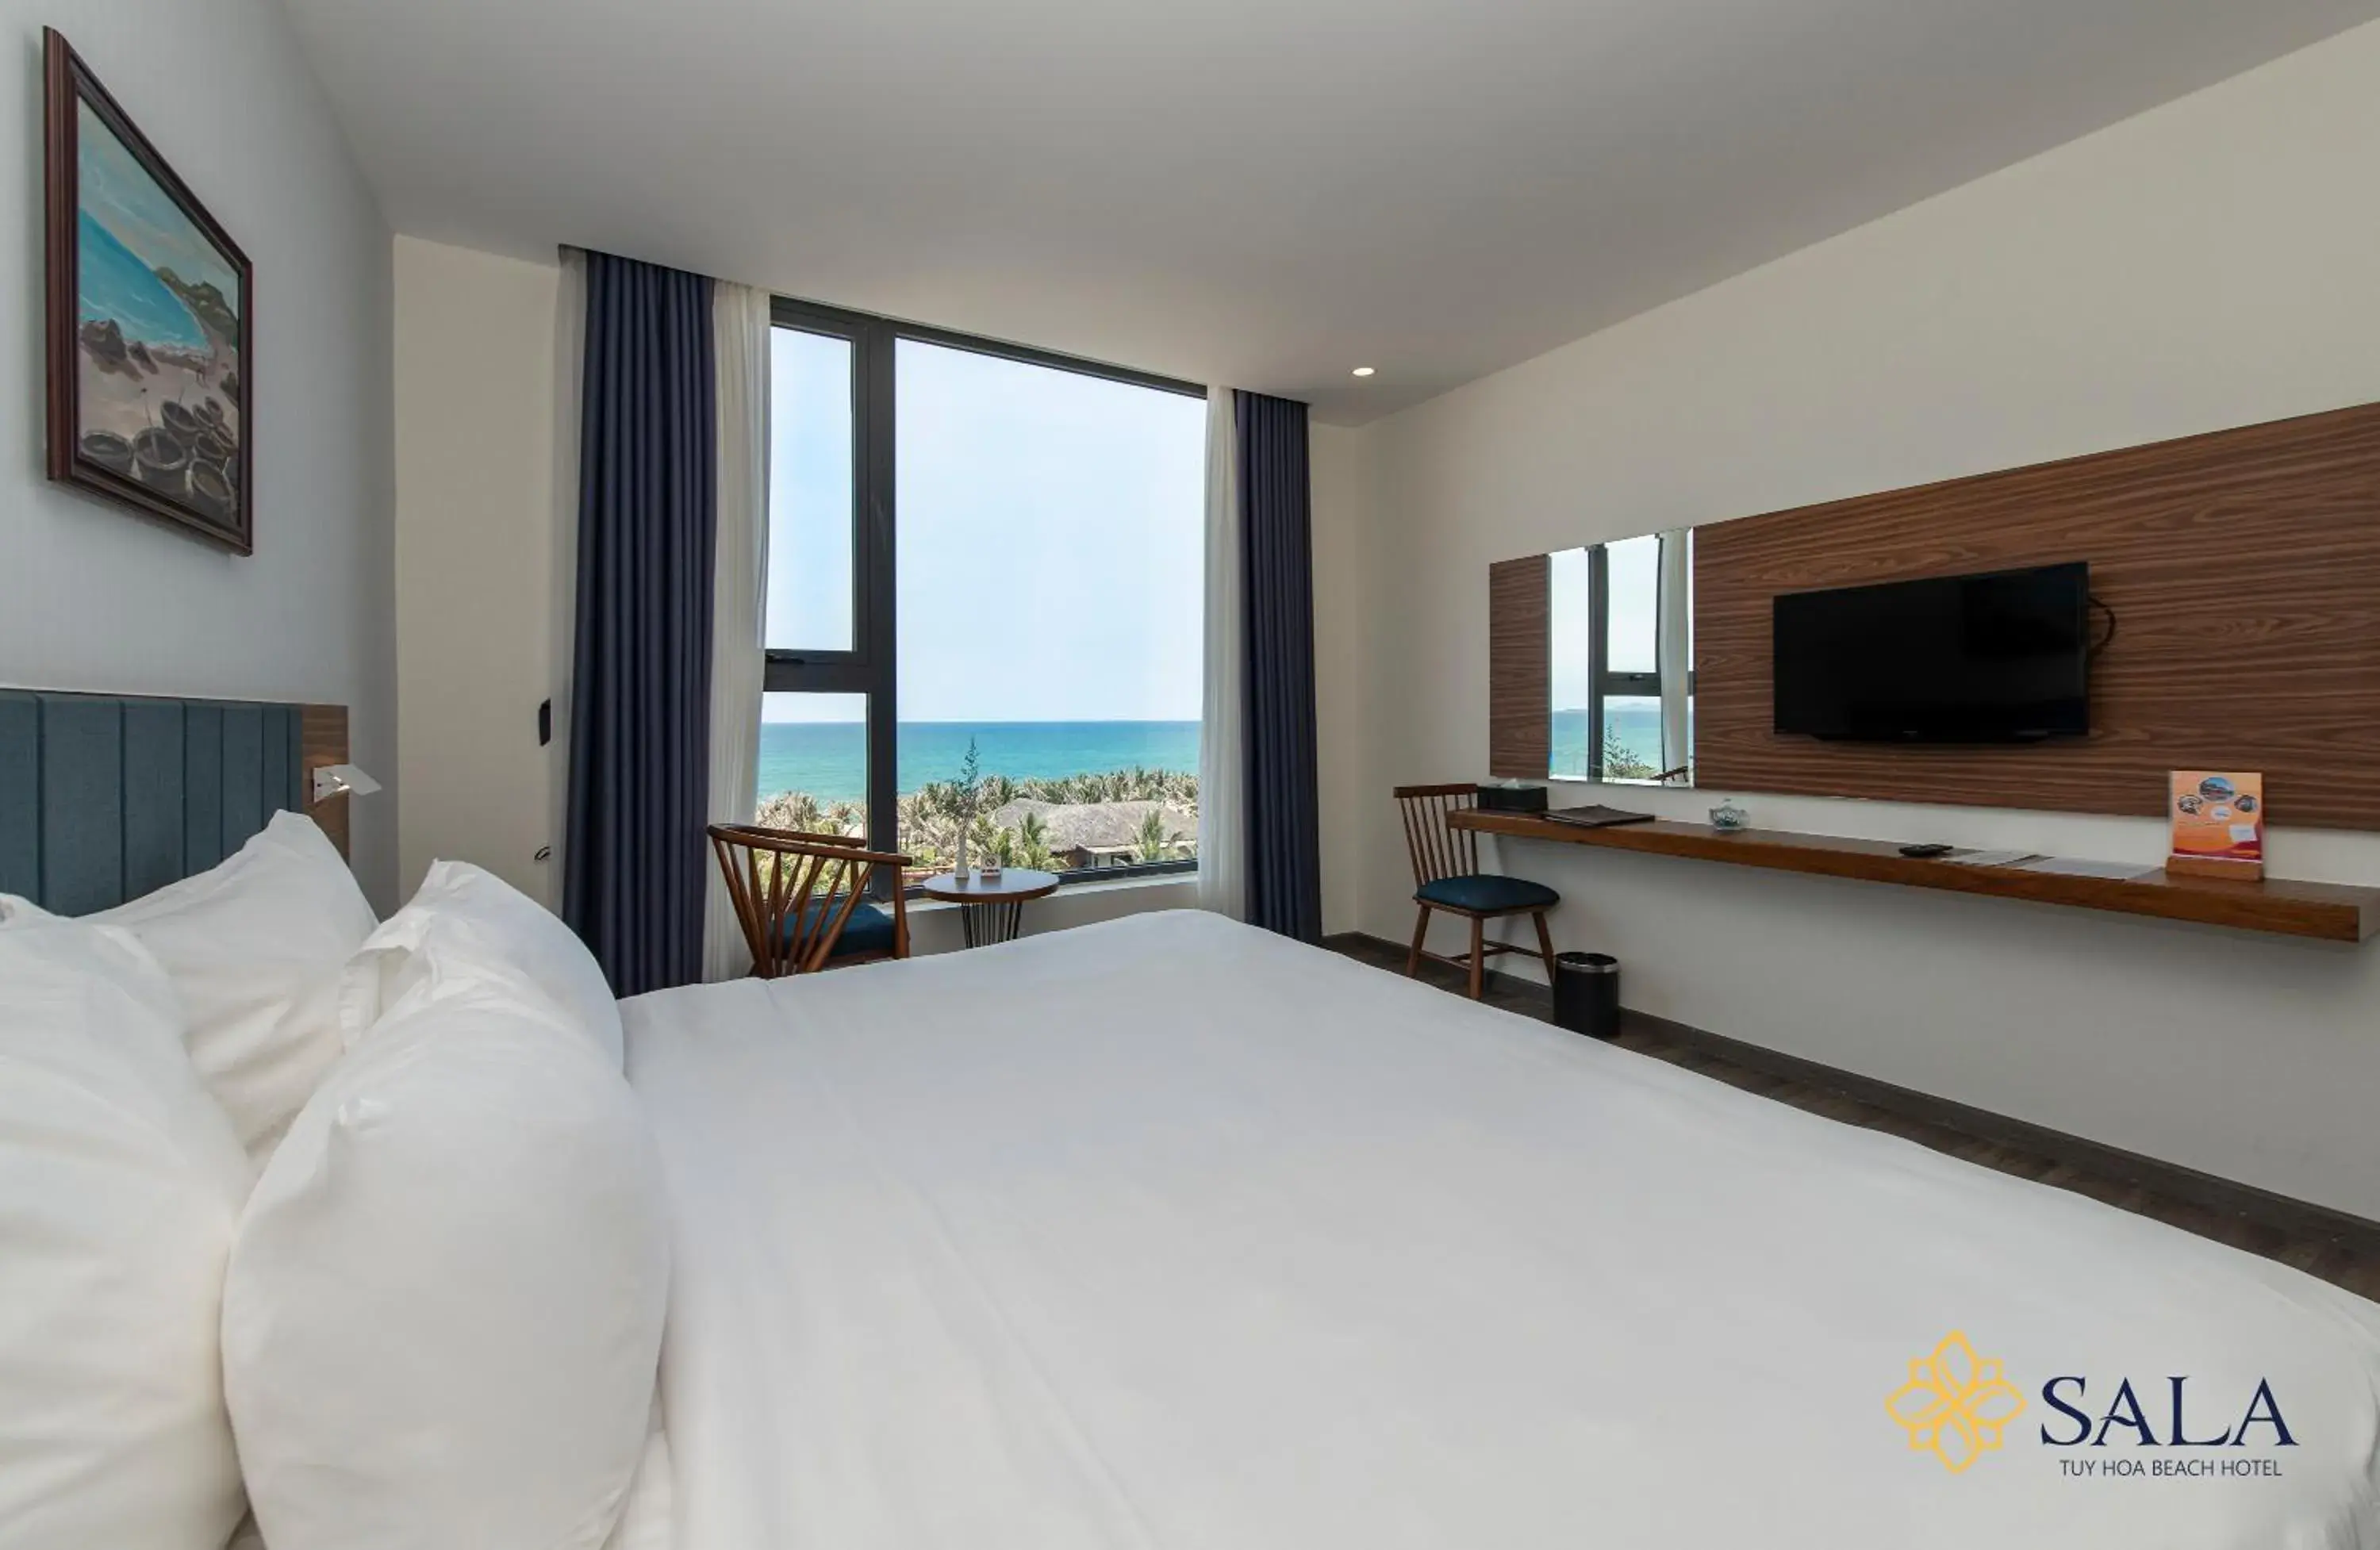 Deluxe Double or Twin Room with Sea View in Sala Tuy Hoa Beach Hotel